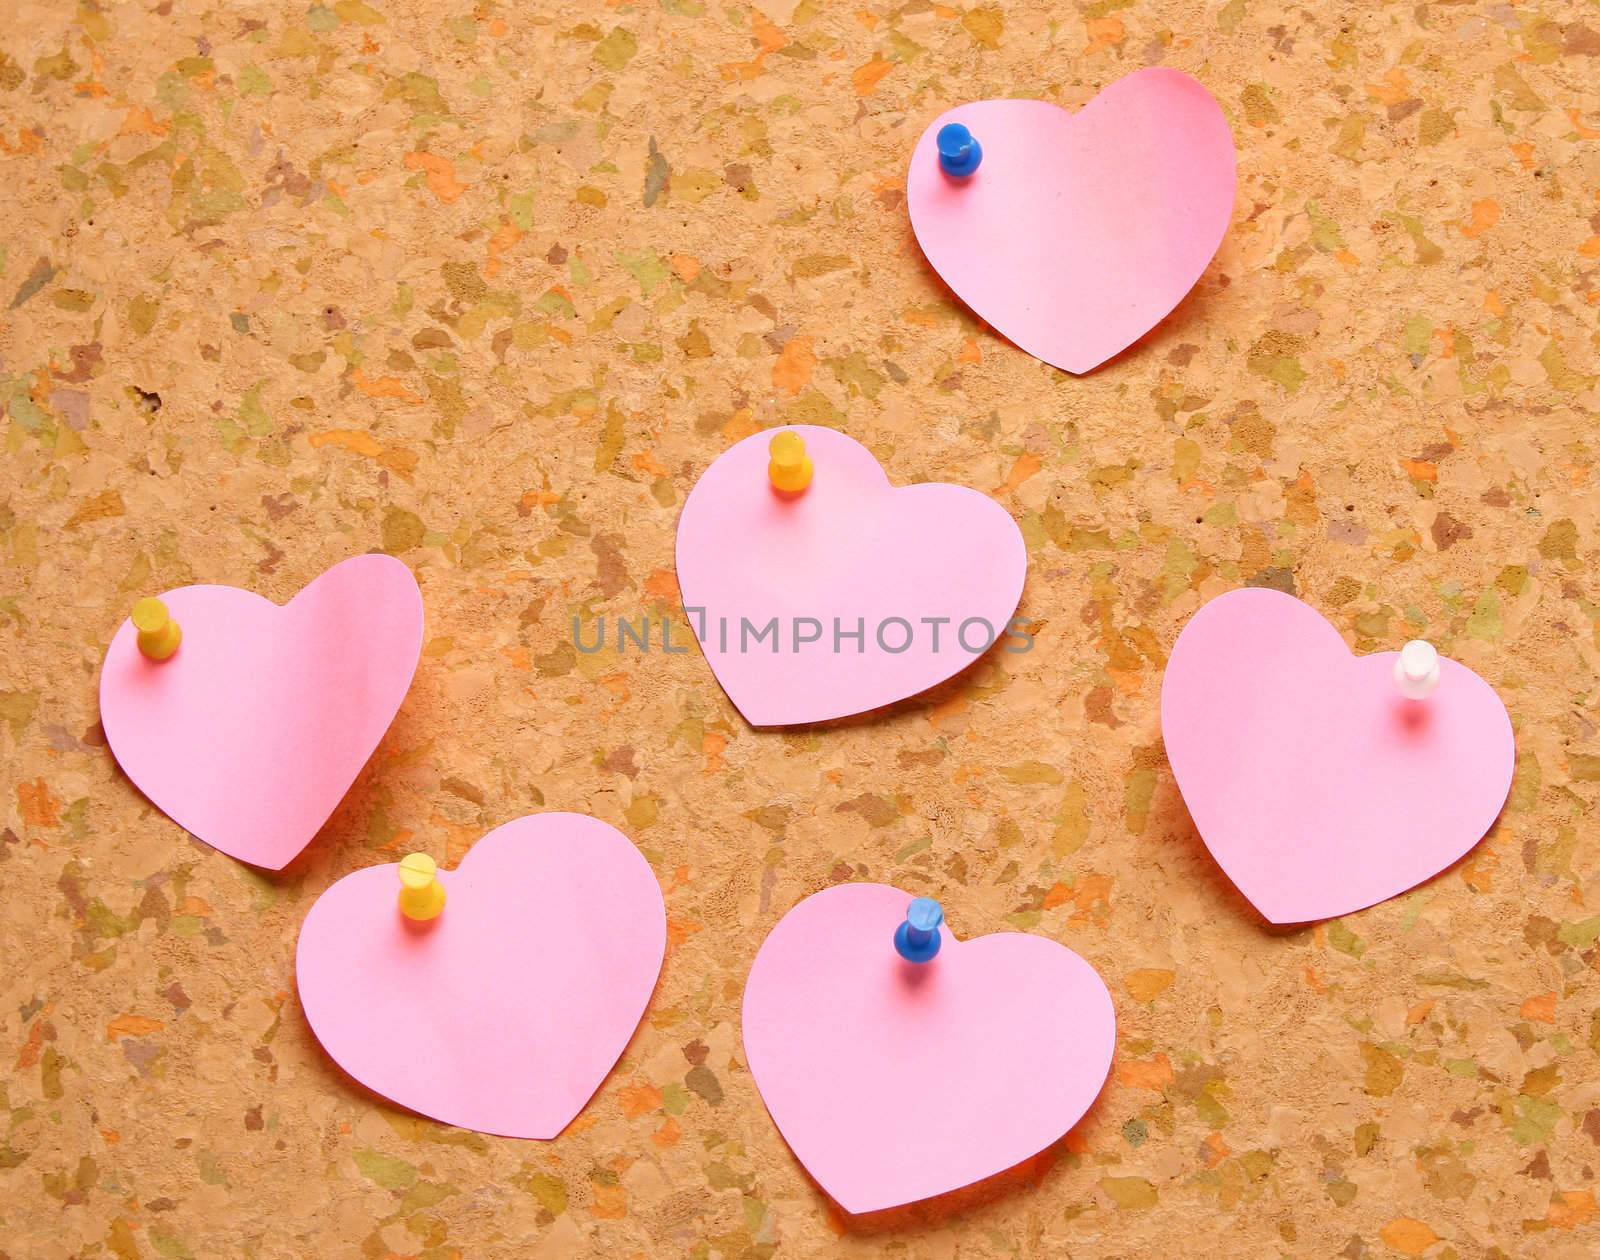 Cork board with heart shape sticky notes